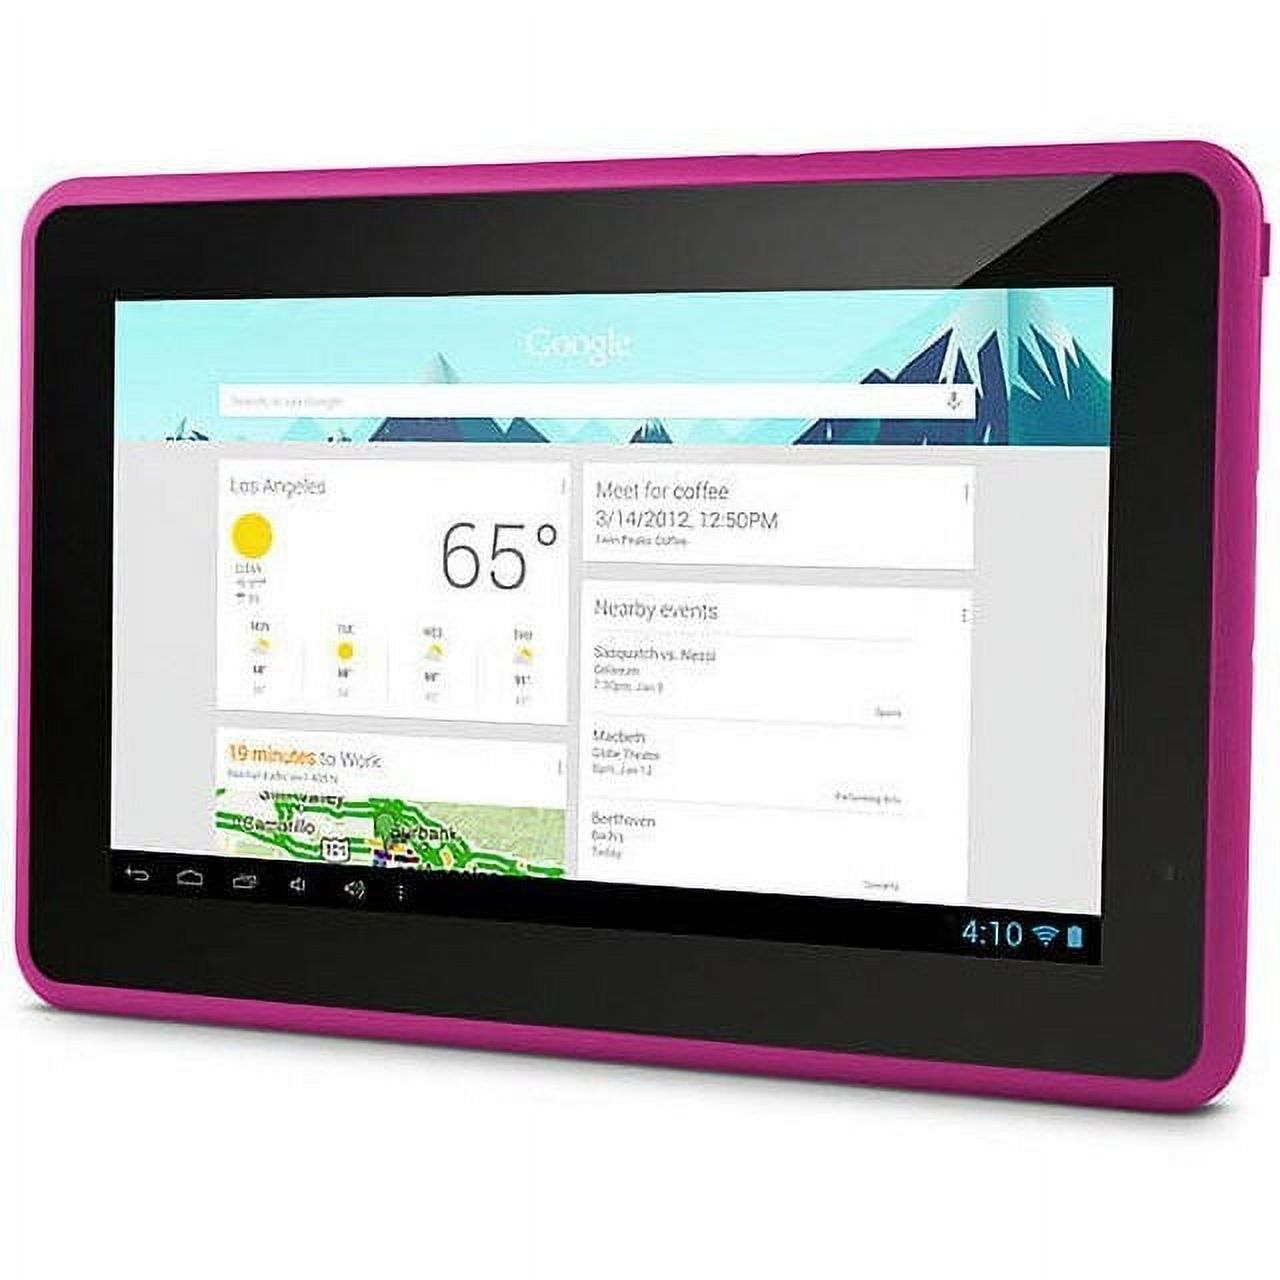 Ematic 7" Tablet with 4GB Memory and Google Mobile Services - image 2 of 4